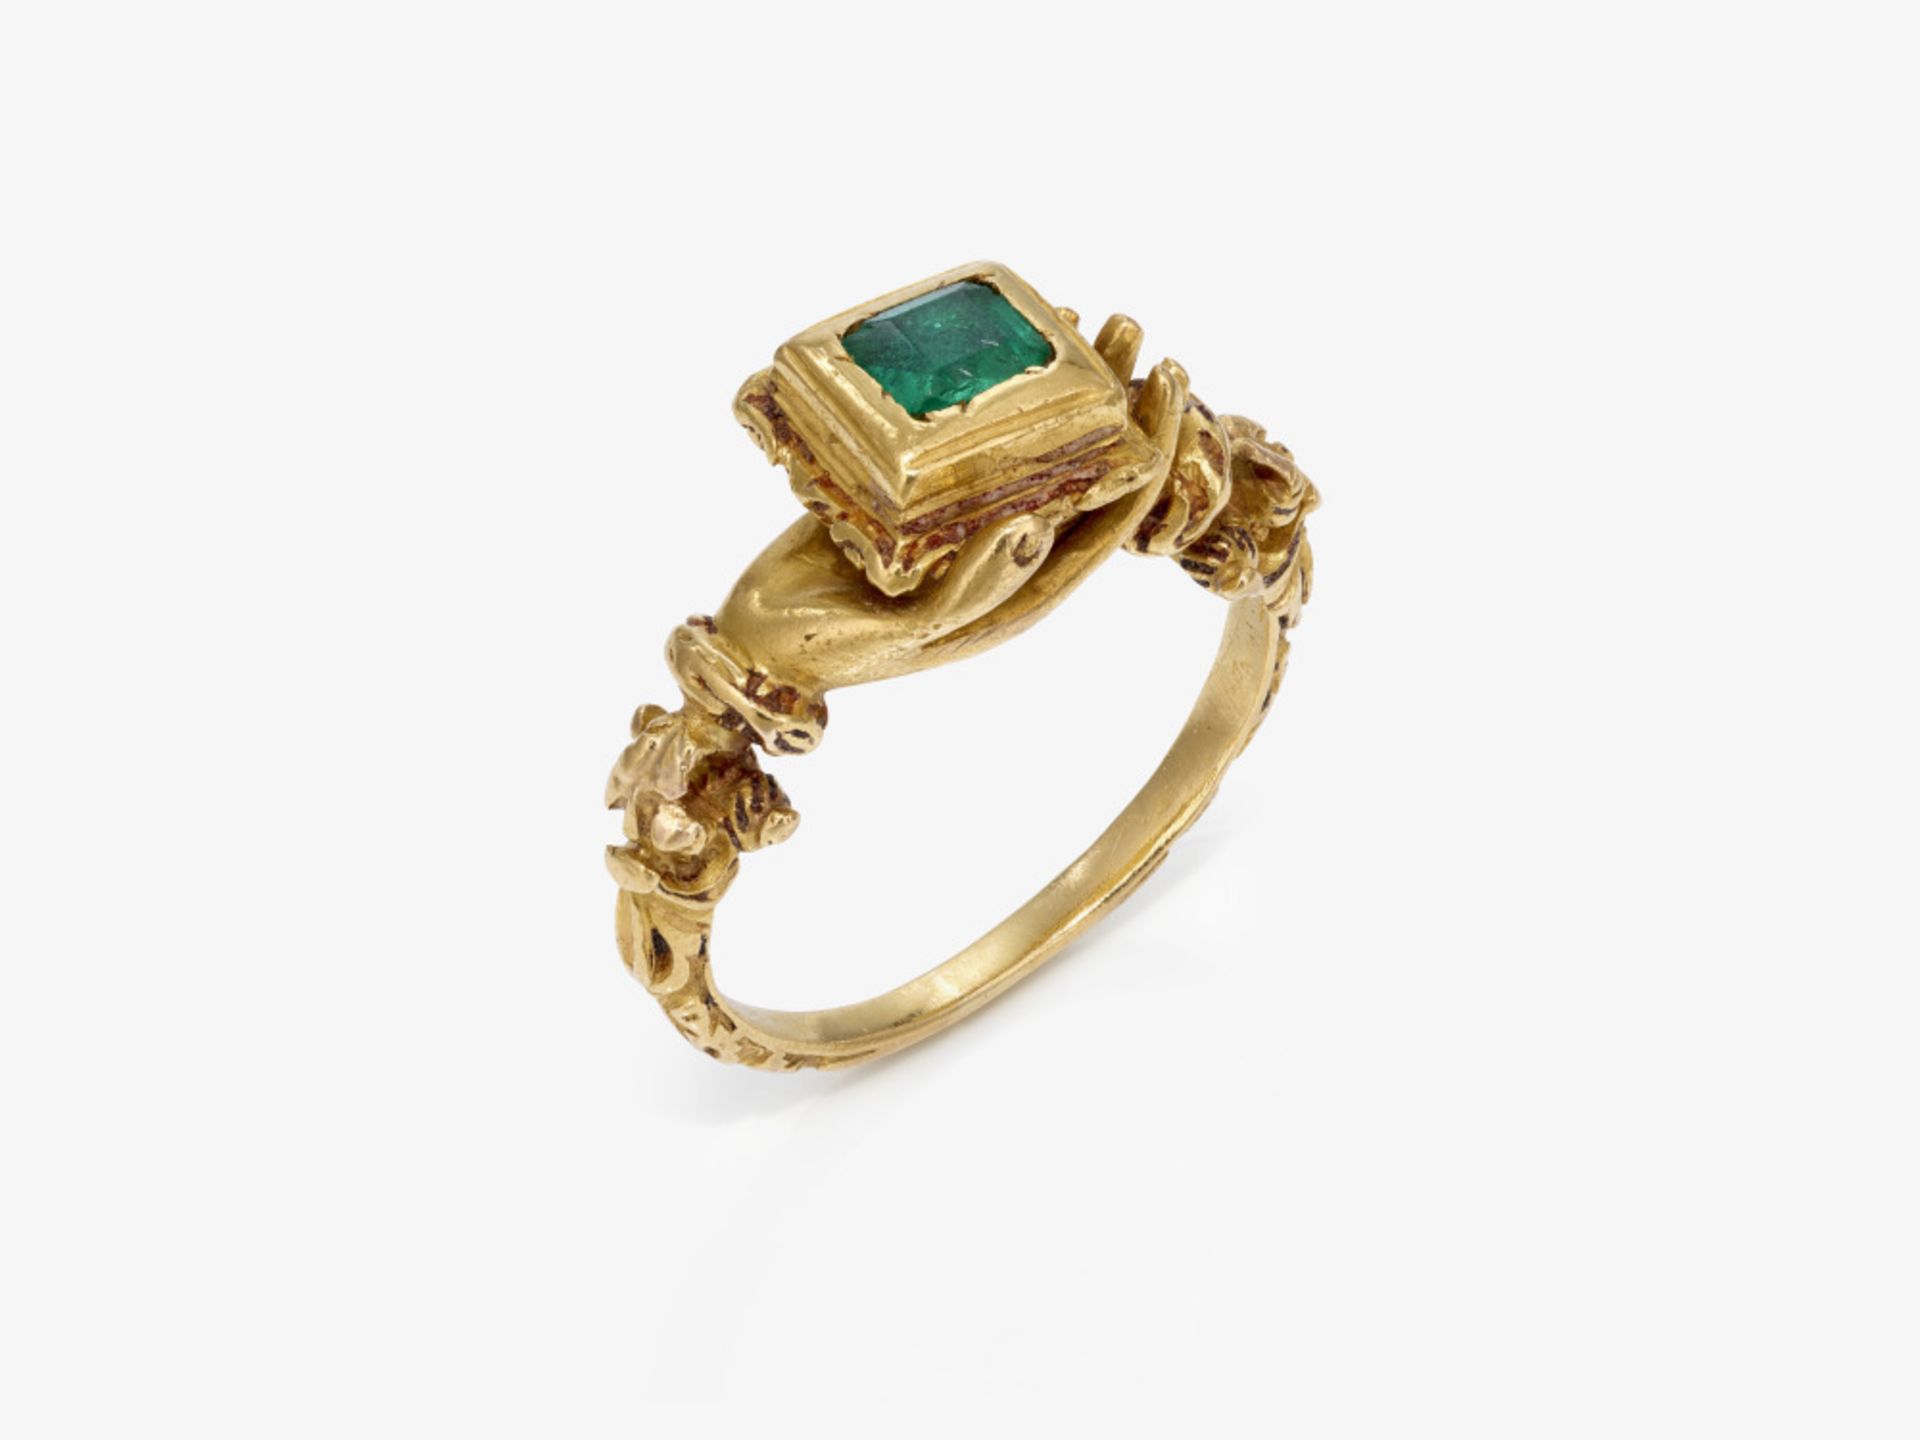 An emerald ring - Probably early 17th century